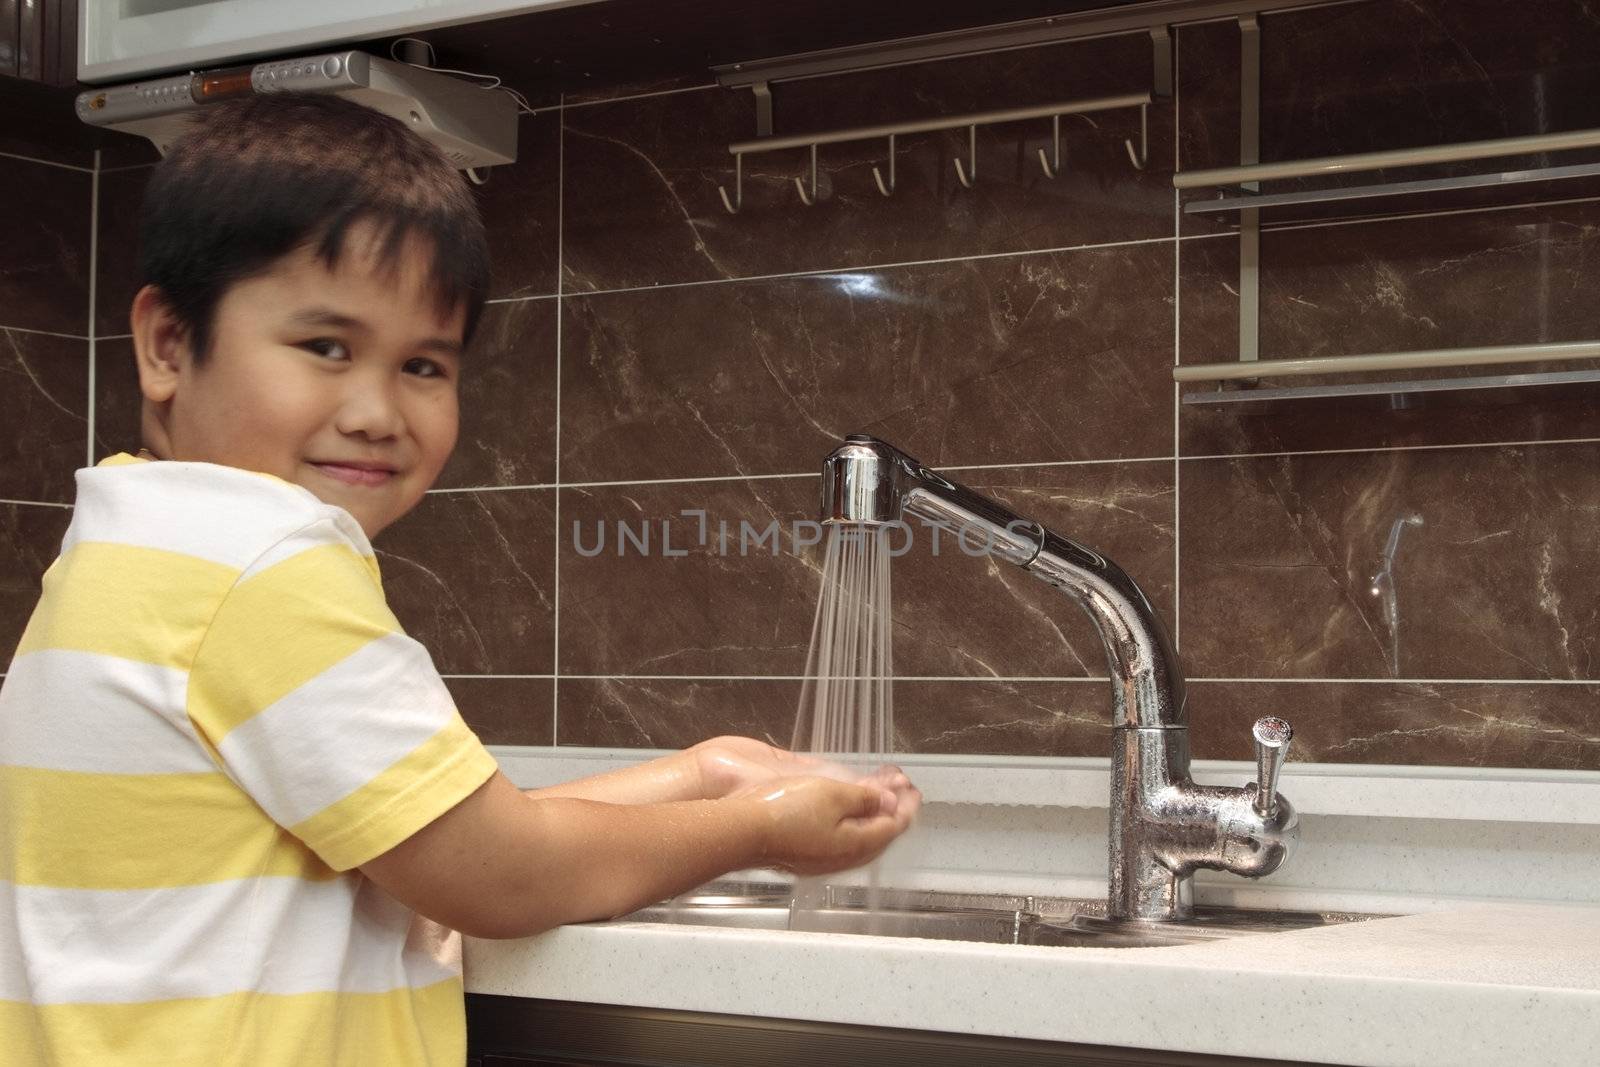 Child washing hands in sink by sacatani